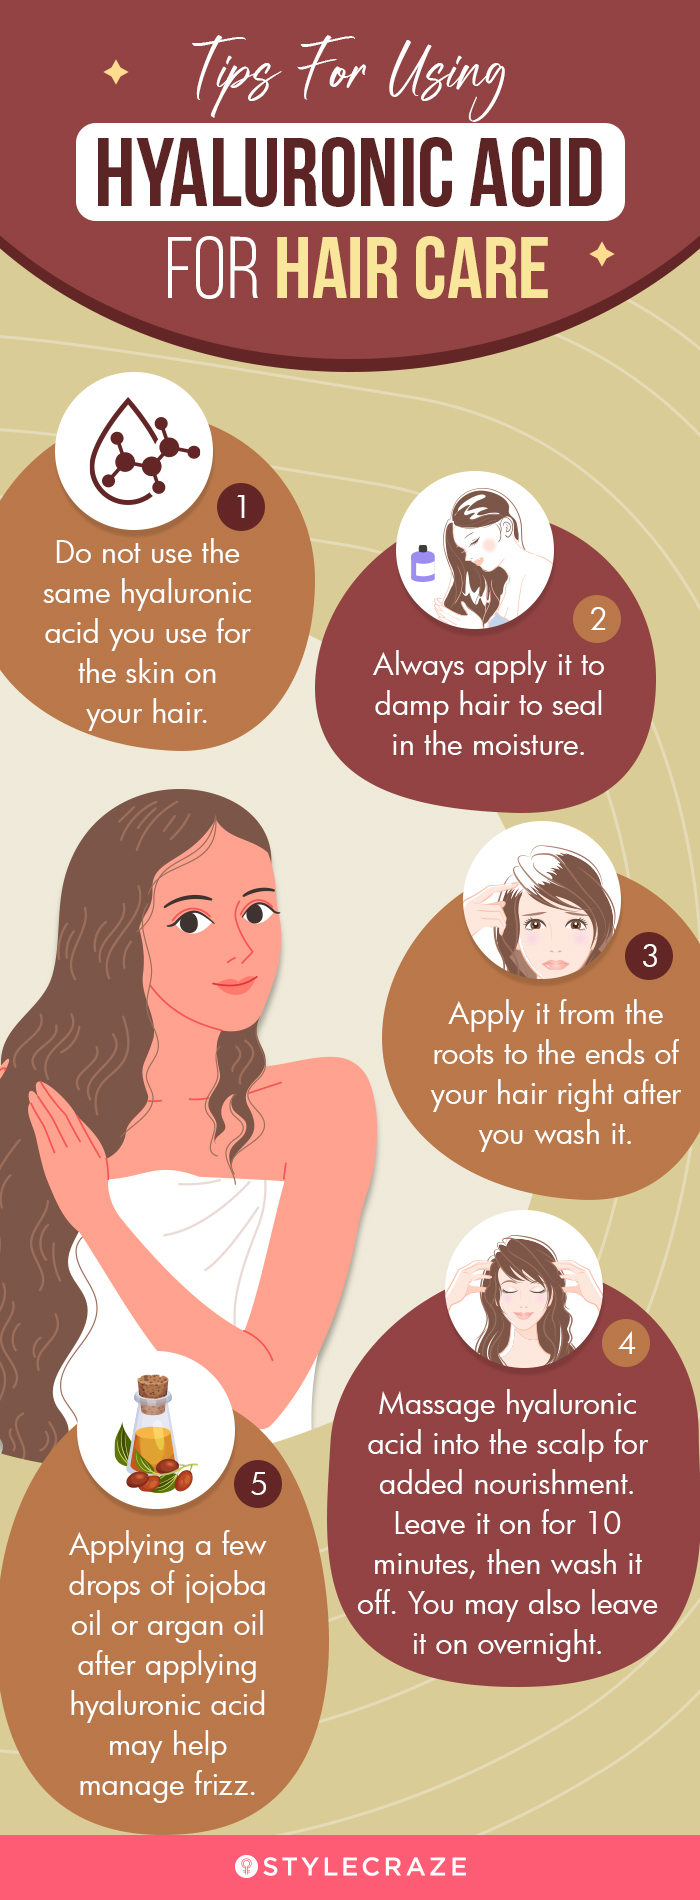 Hyaluronic Acid For Hair: How It Works & Possible Side Effects